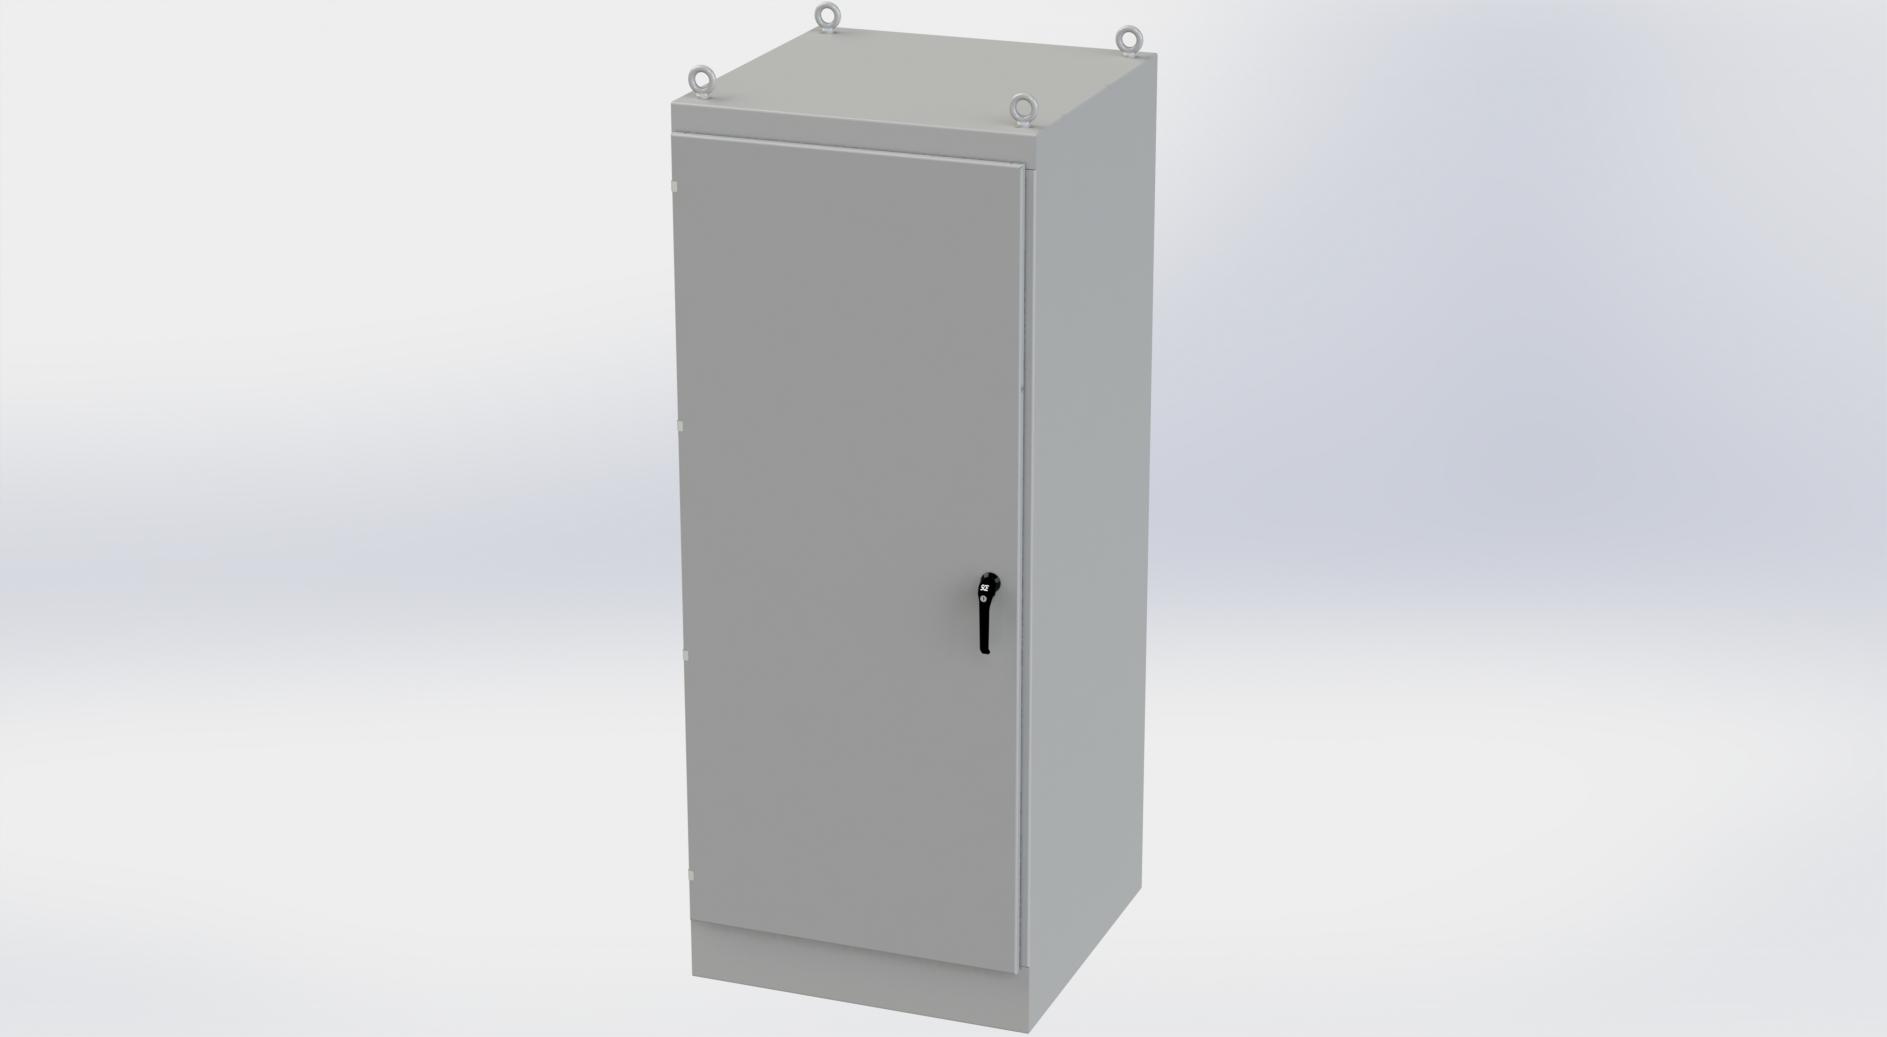 Saginaw Control SCE-903636FS FS Enclosure, Height:90.00", Width:36.00", Depth:36.00", ANSI-61 gray powder coat inside and out. Optional sub-panels are powder coated white.